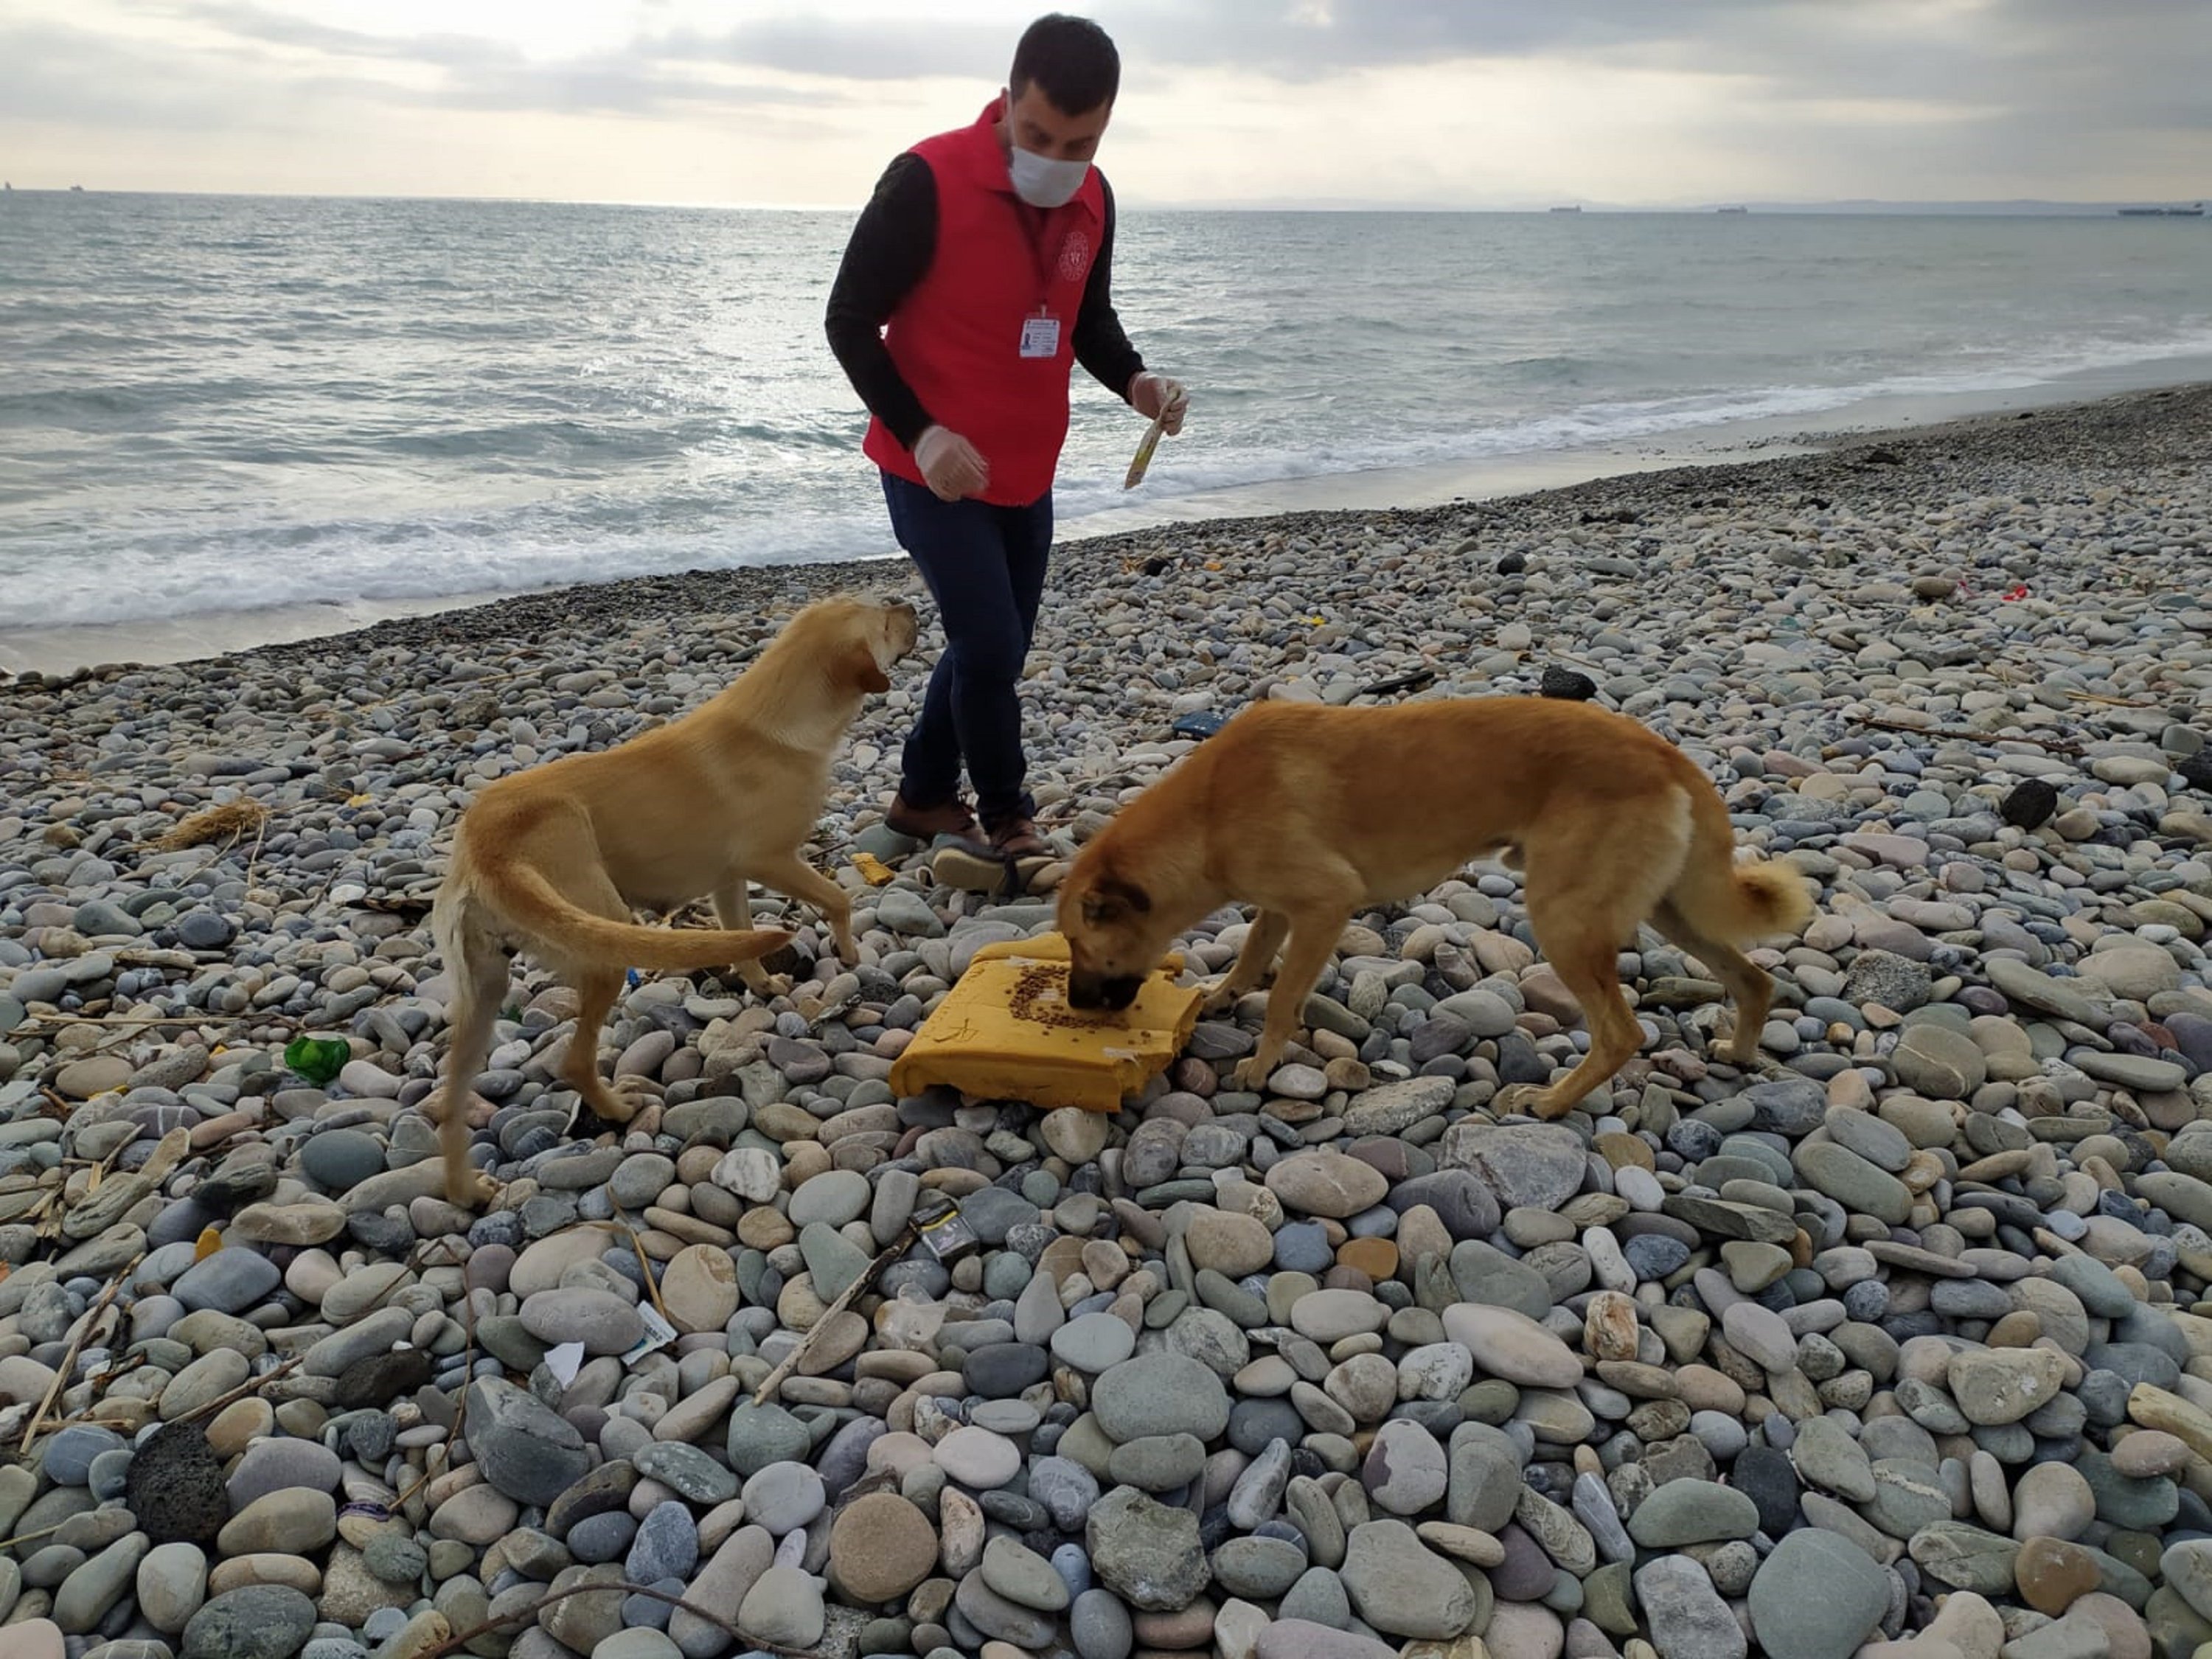 Members of Vefa social support groups provides food for stray dogs in Hatay province, on April 9, 2020. Many municipalities began providing food and water to street animals to prevent starvation and dehydration. (İHA Photo)